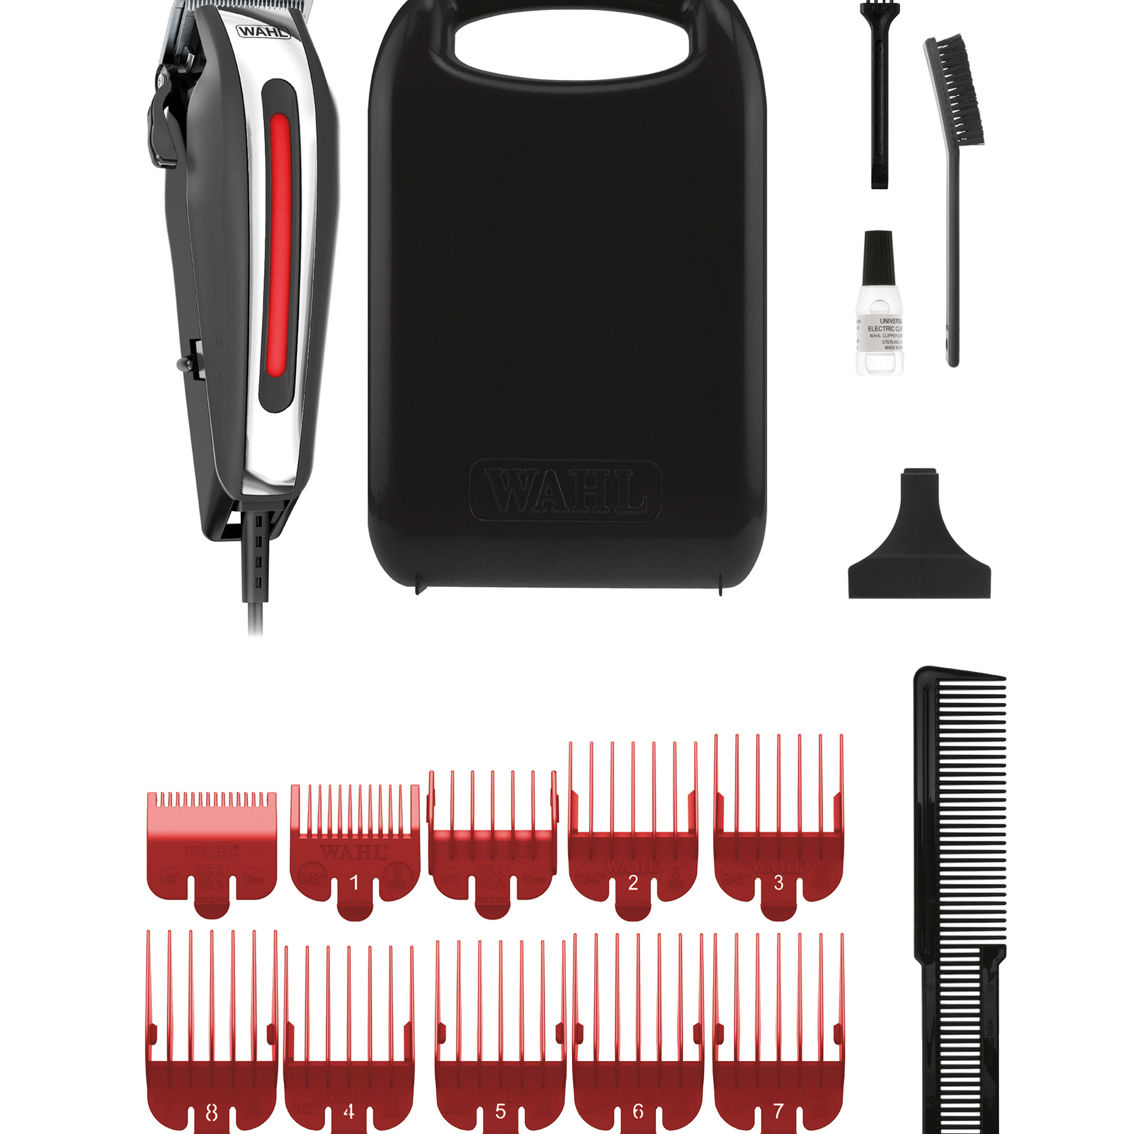 Wahl Fade Pro Clippers 79790 - Image 2 of 3